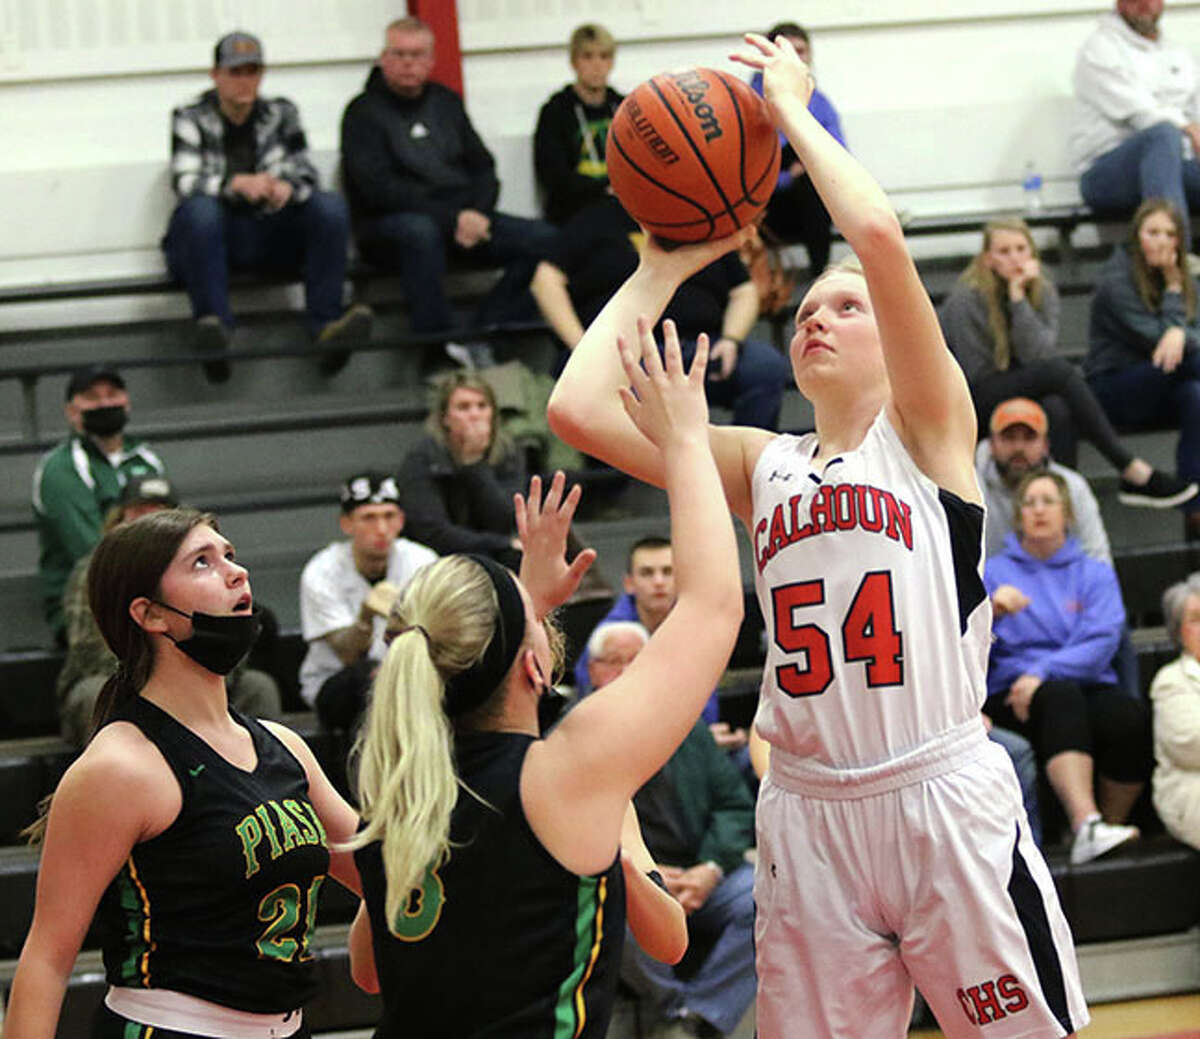 Calhoun's Audrey Gilman (54) puts up a shot over Southwestern's Addie Green and Tristyn Ditterline (left) on Monday night at Ringhausen Gym in Hardin.